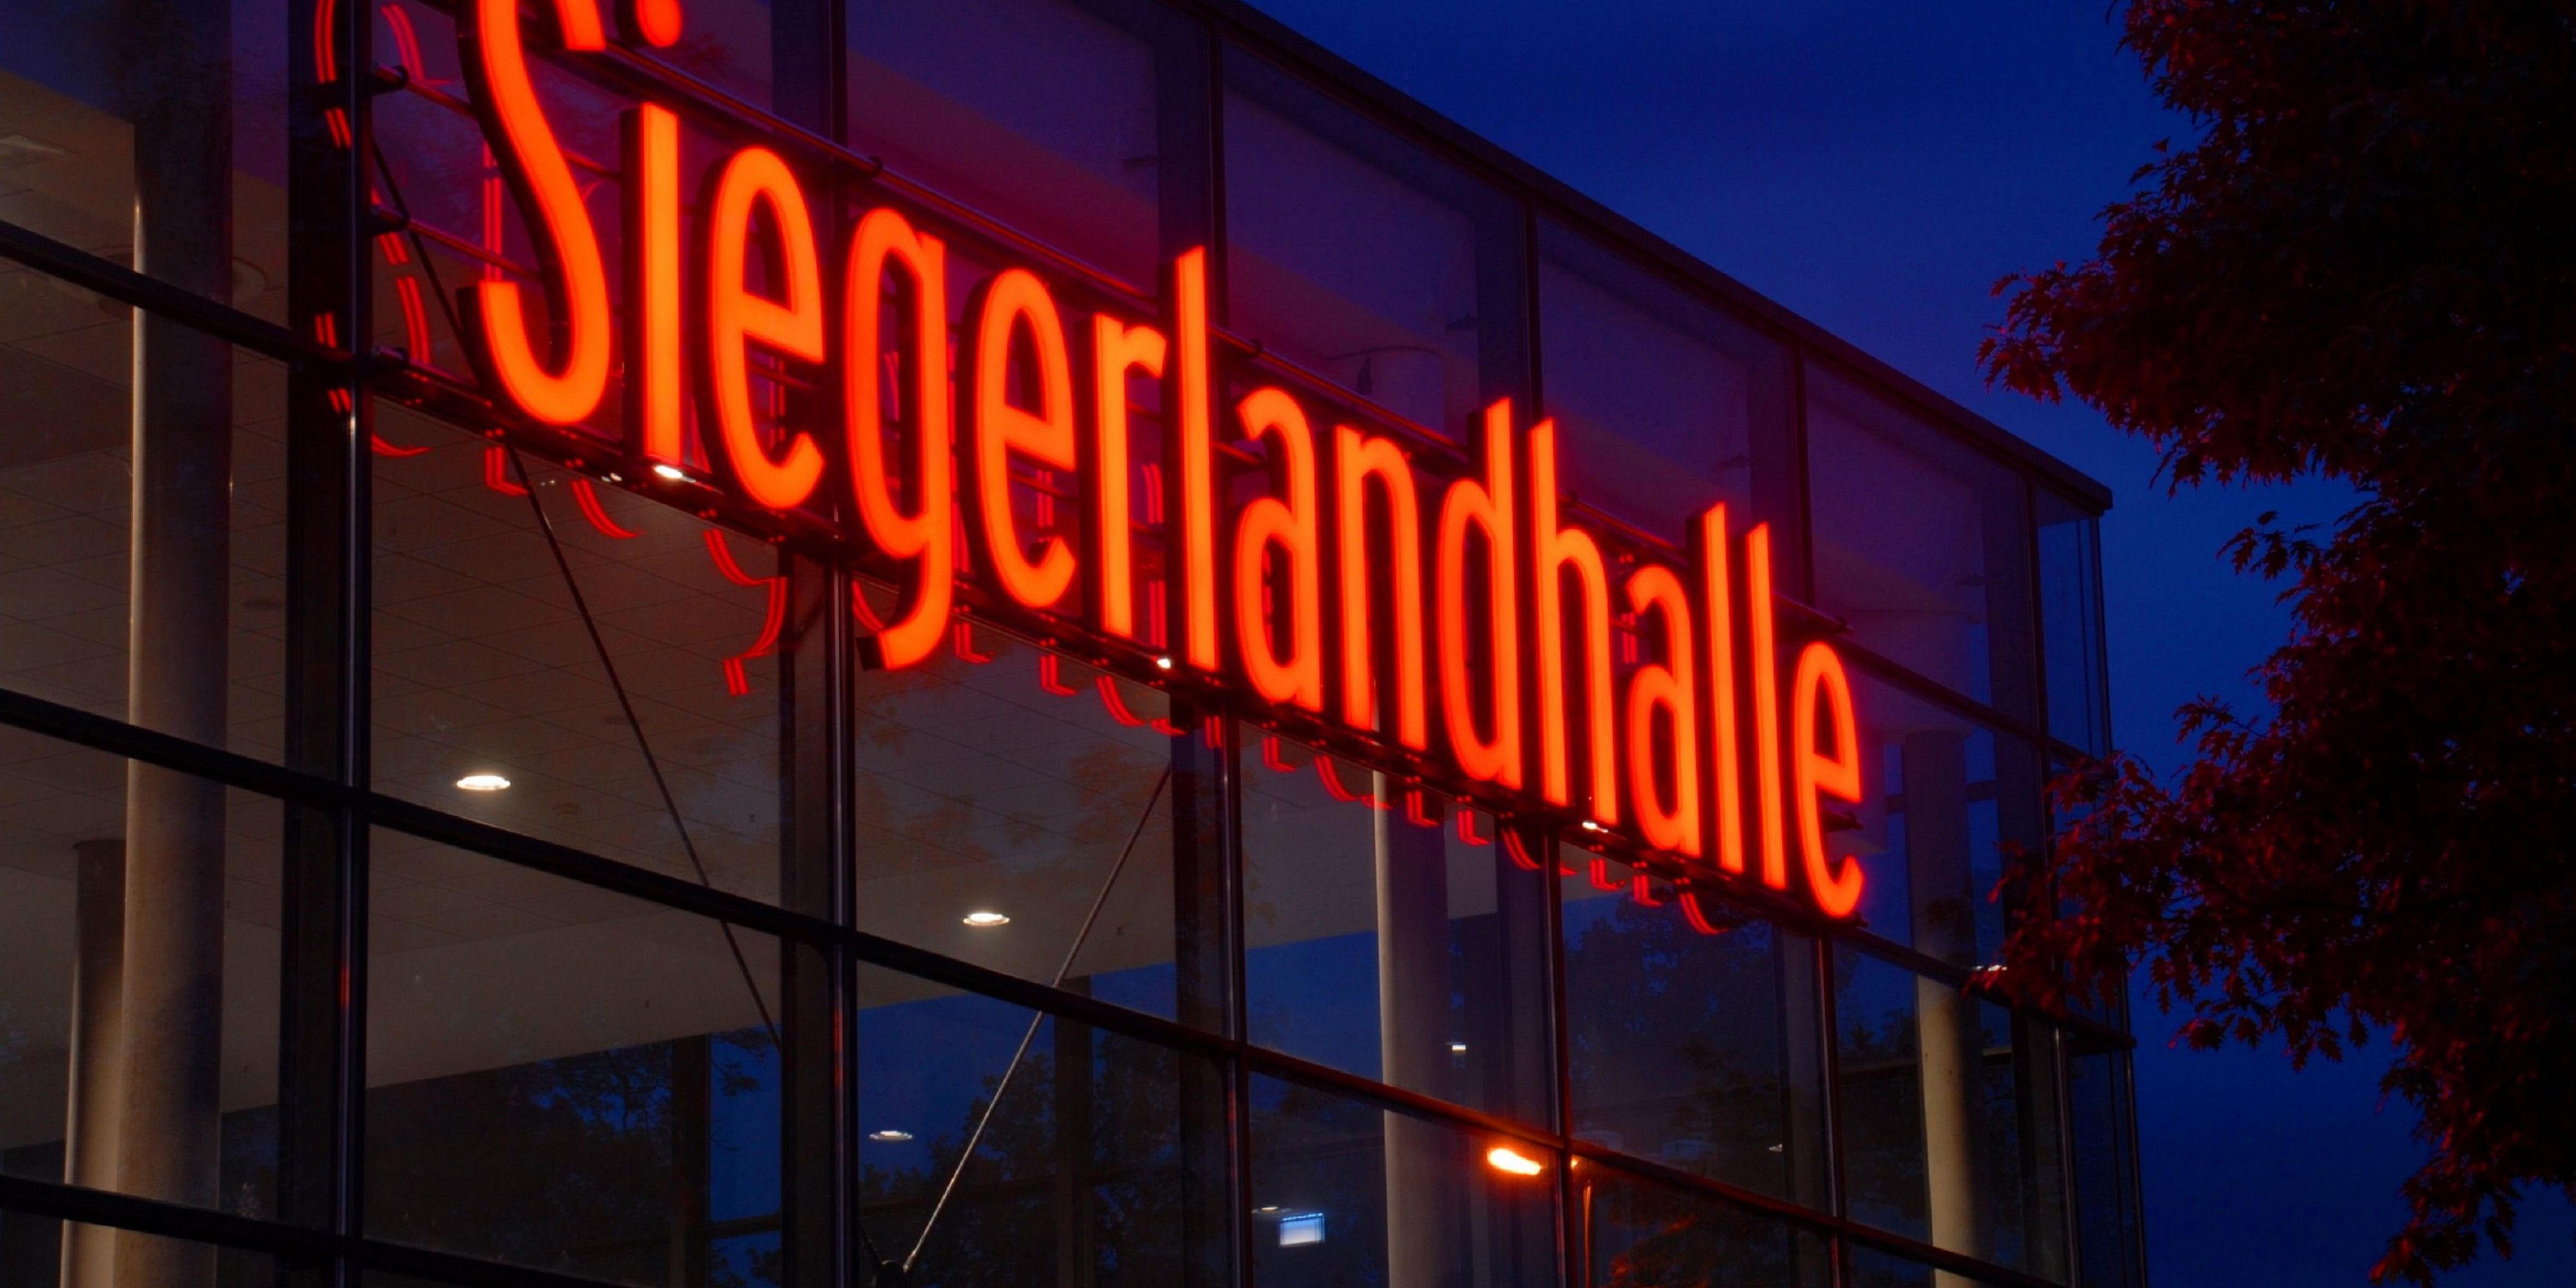 Only 200 metres from our hotel you will find the Siegerlandhalle, where you can experience conferences, trade fairs, events and concerts live.